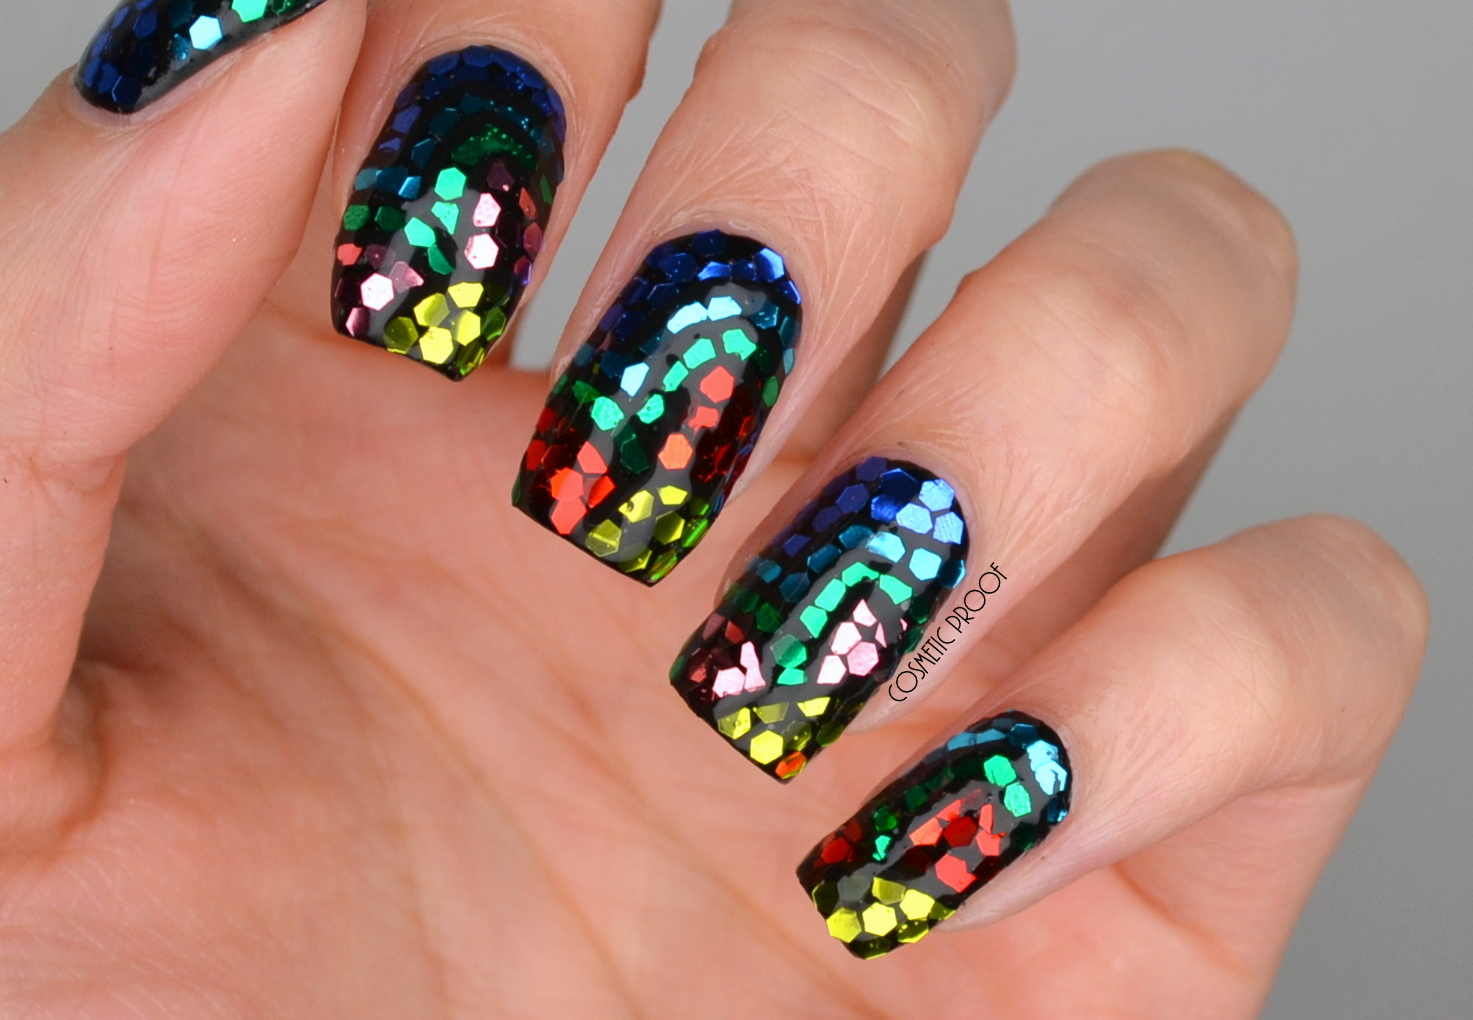 10. Stained Glass Nail Art - wide 7